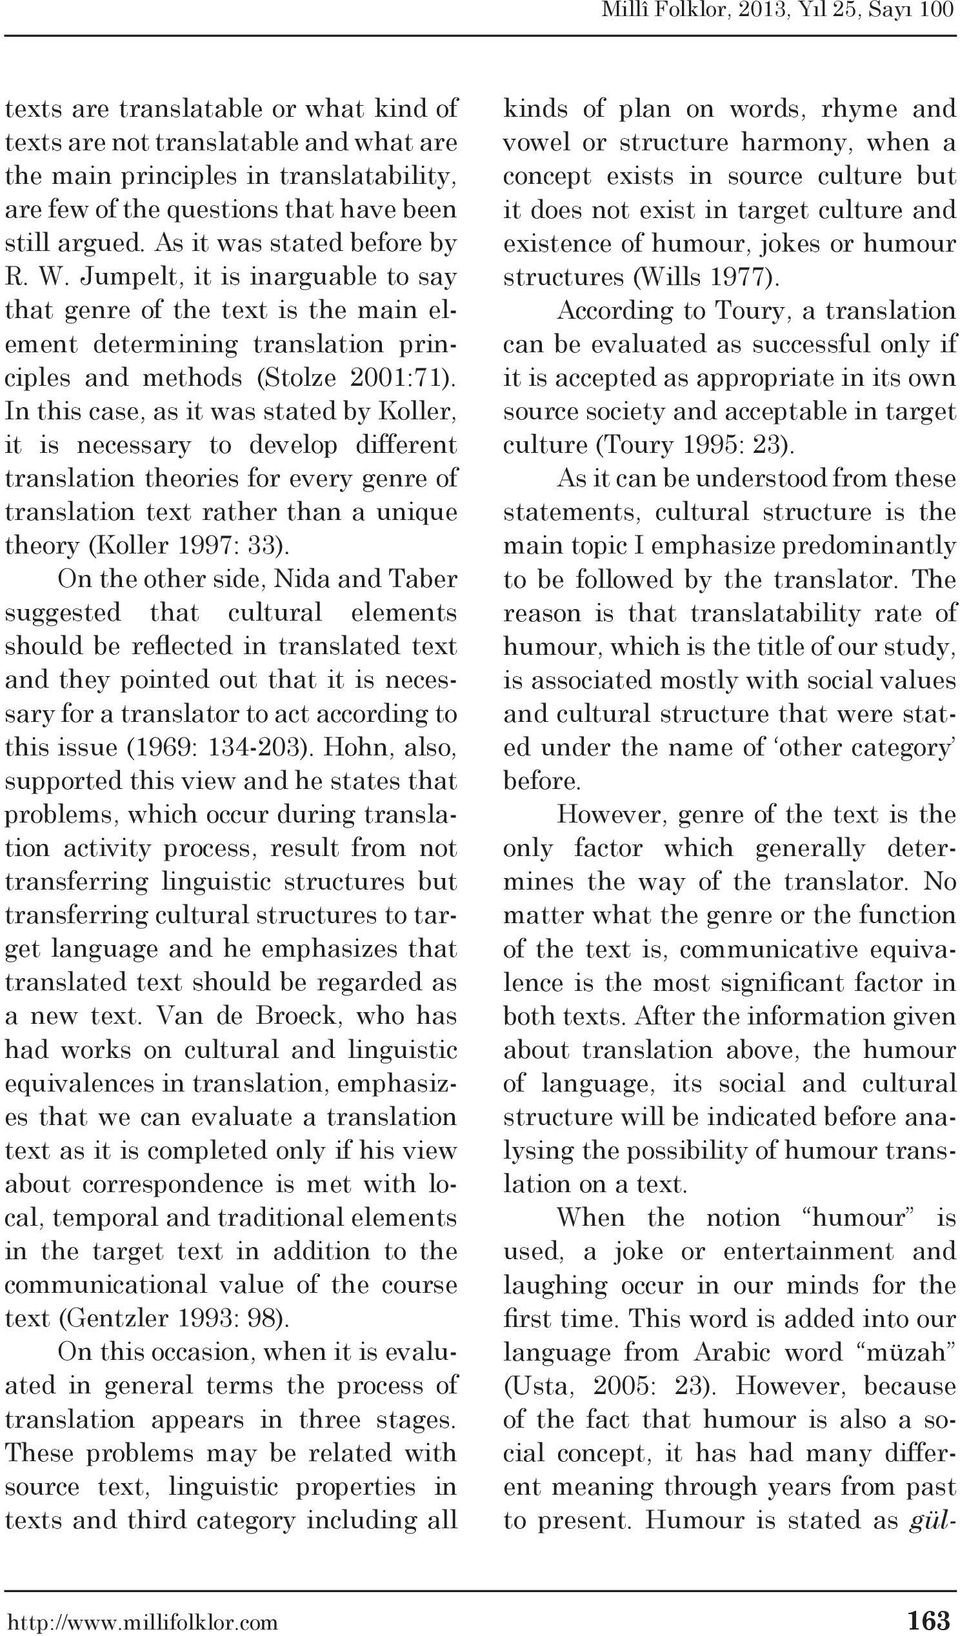 In this case, as it was stated by Koller, it is necessary to develop different translation theories for every genre of translation text rather than a unique theory (Koller 1997: 33).